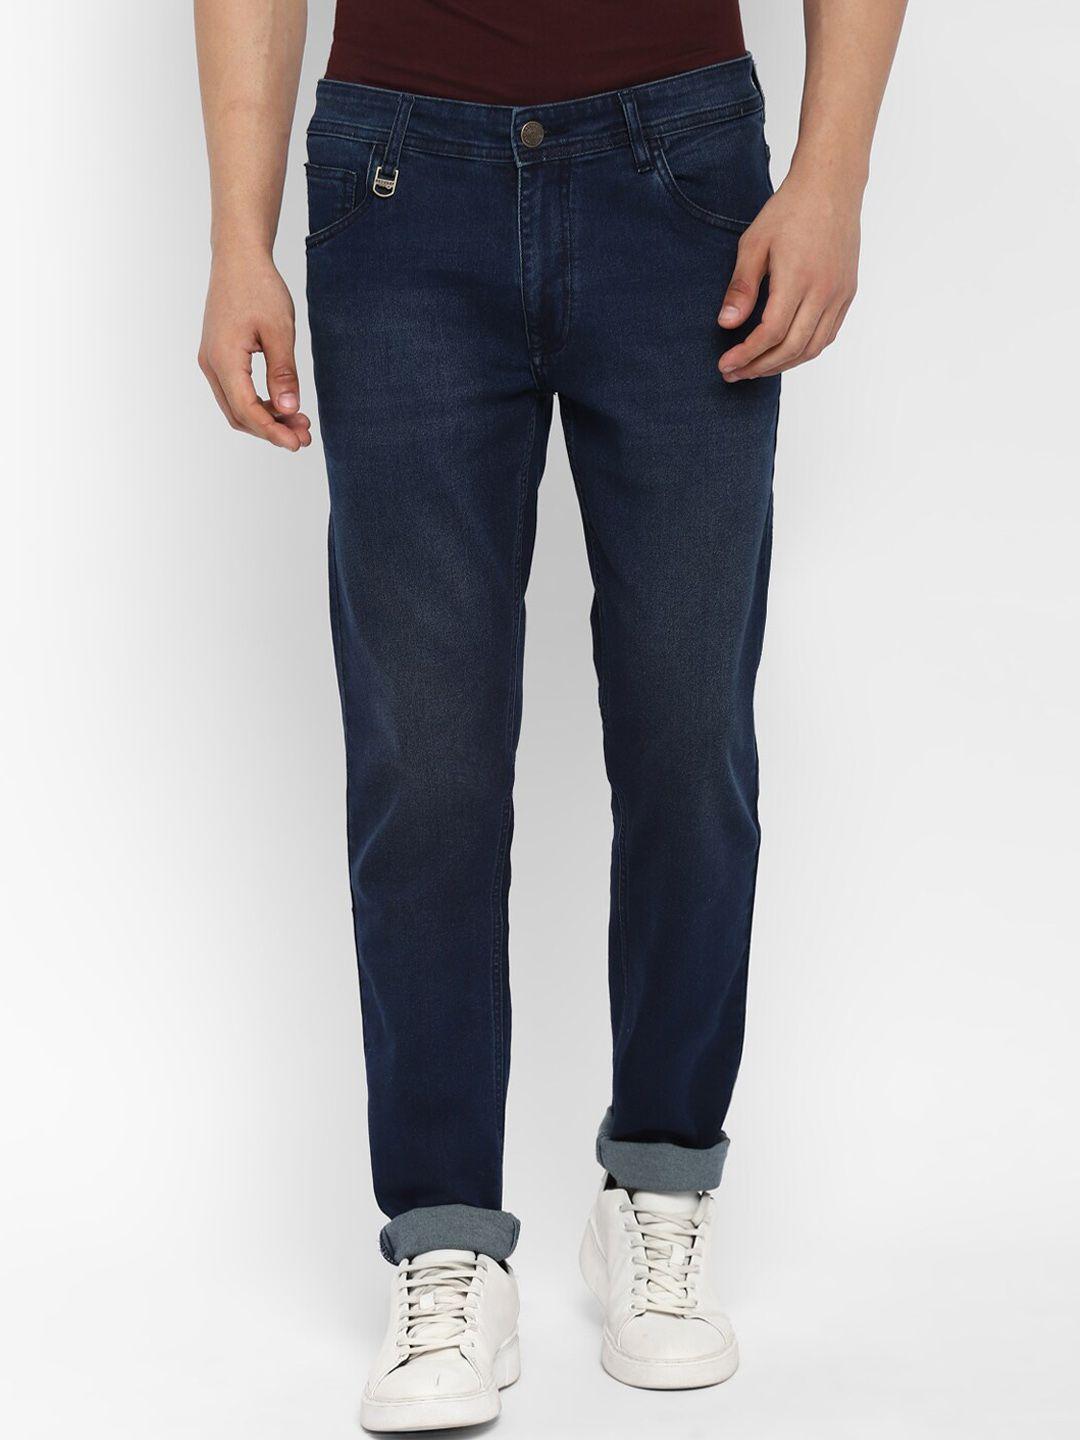 red-chief-men-navy-blue-solid-narrow-fit-stretchable-jeans